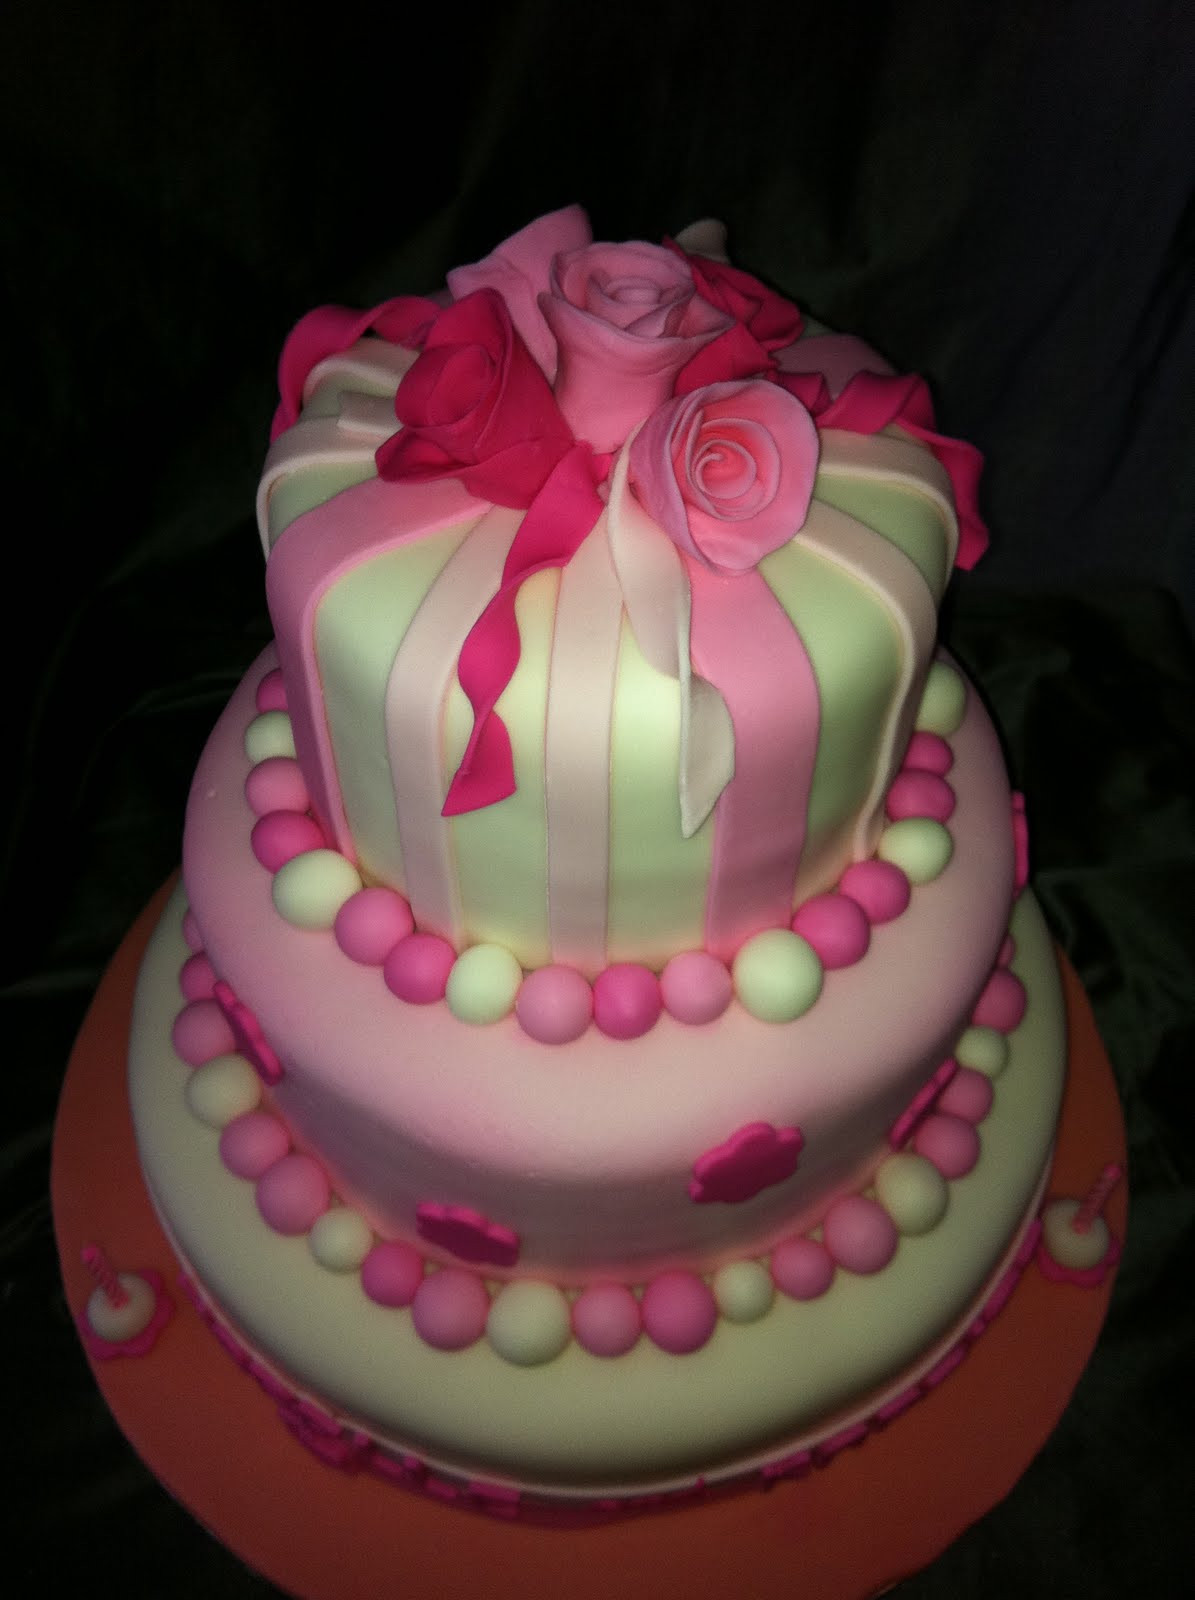 3 Tier Birthday Cake
 Jocelyn s Wedding Cakes and More 3 tiered cake 1st